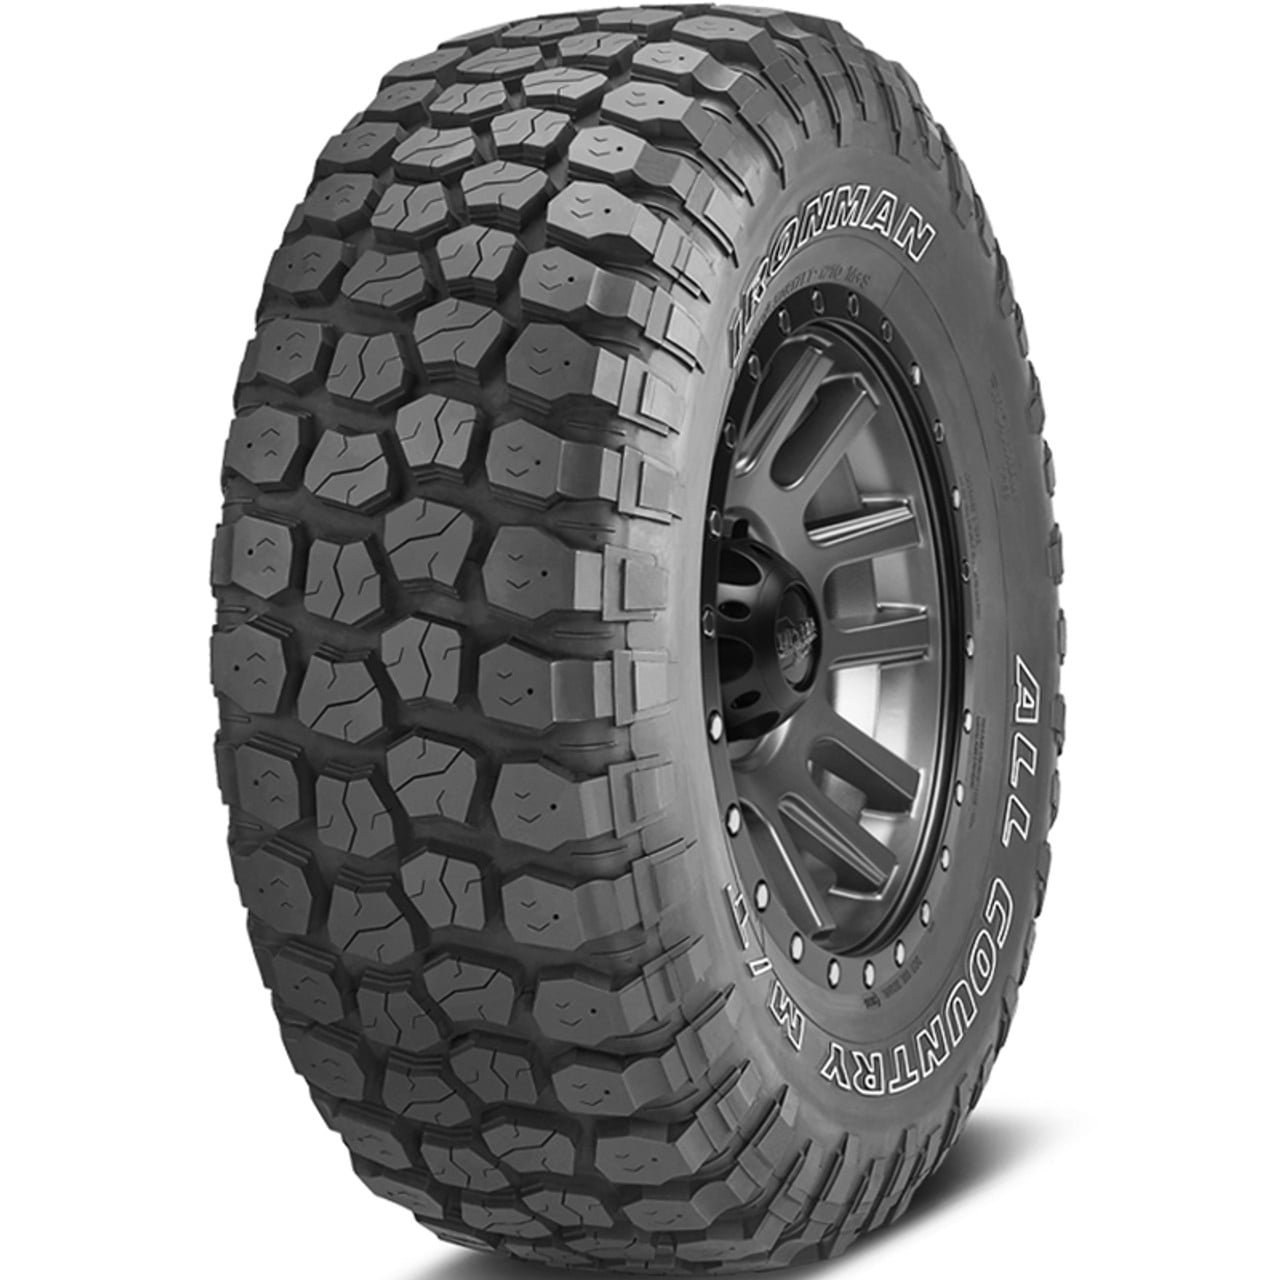 Ironman All Country M/T LT 35X12.50R20 Load F 12 Ply MT Mud Tire